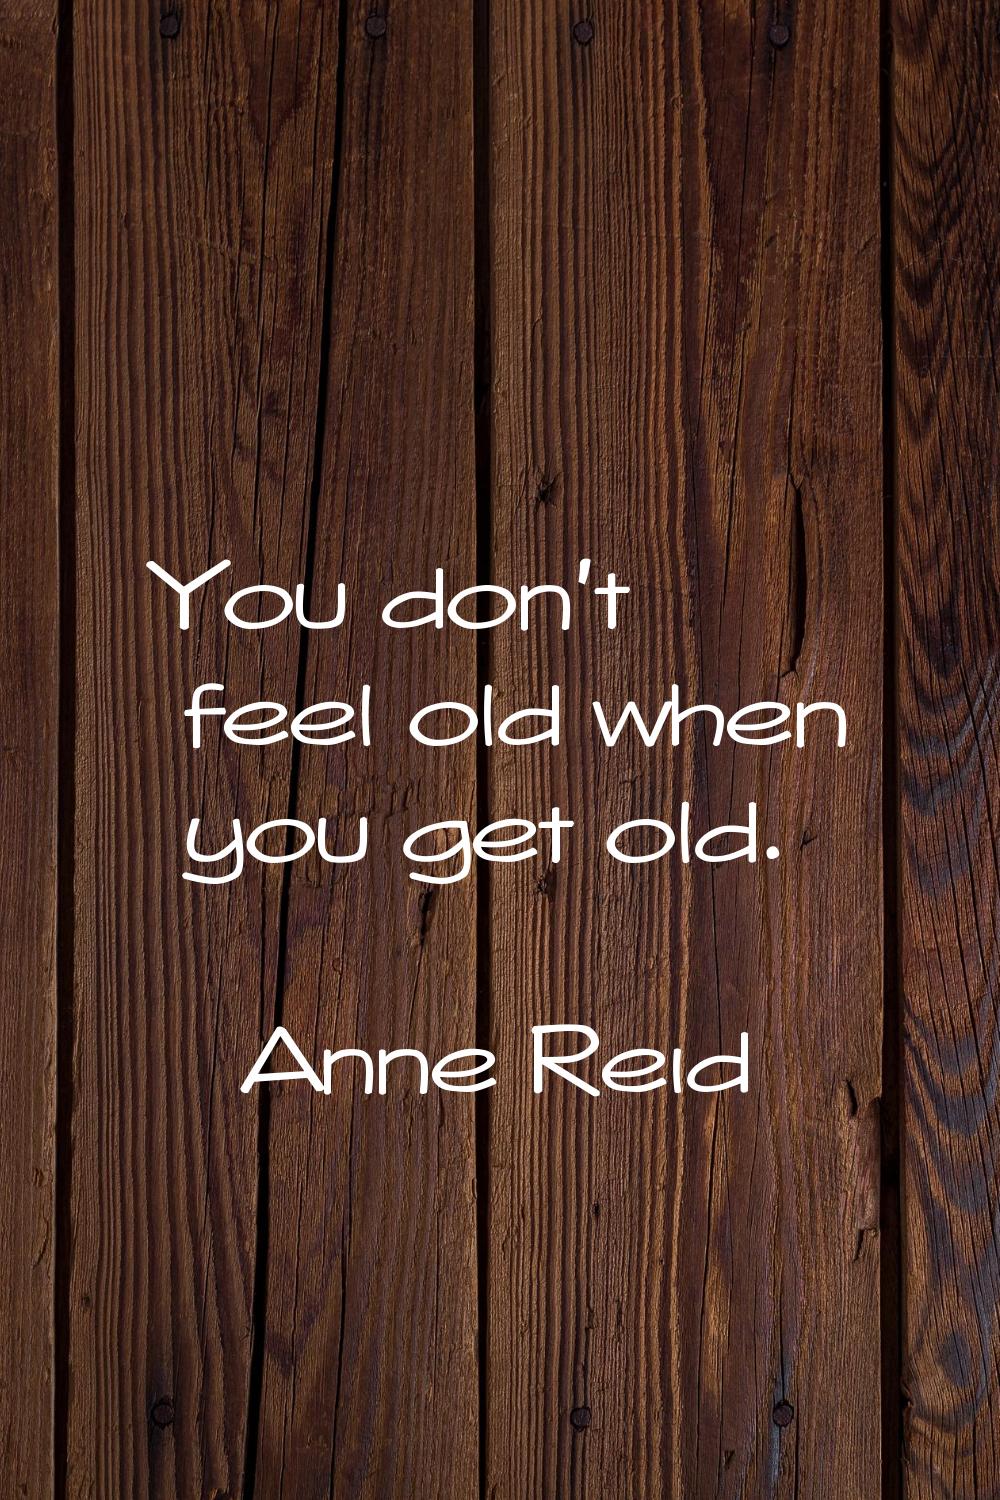 You don't feel old when you get old.